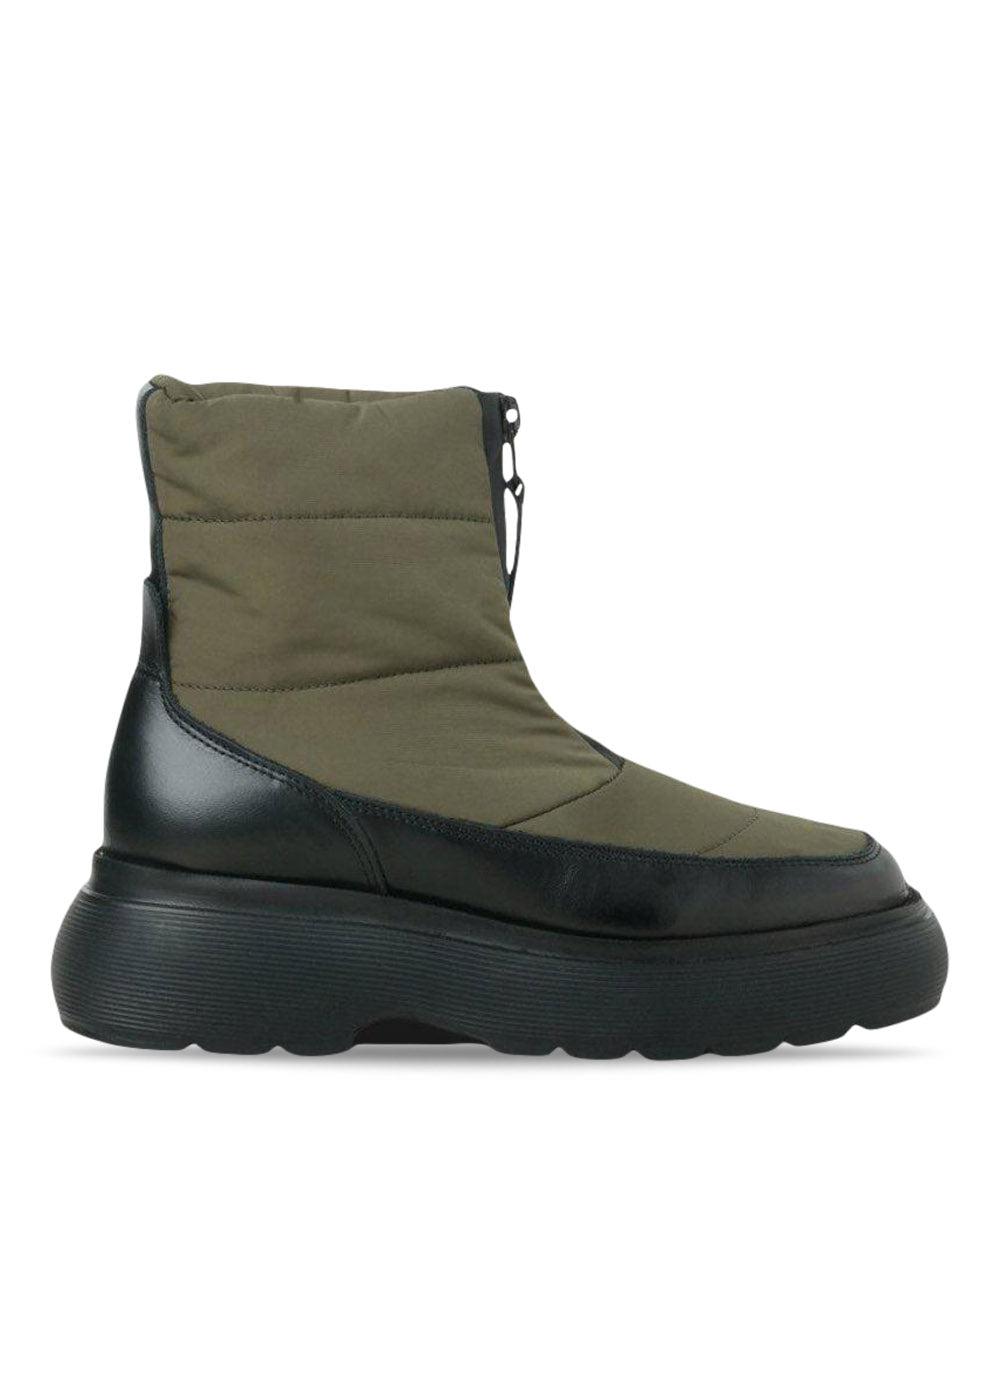 Garment Projects Cloud Snow Boot - Army Nylon - Army. Køb sko her.